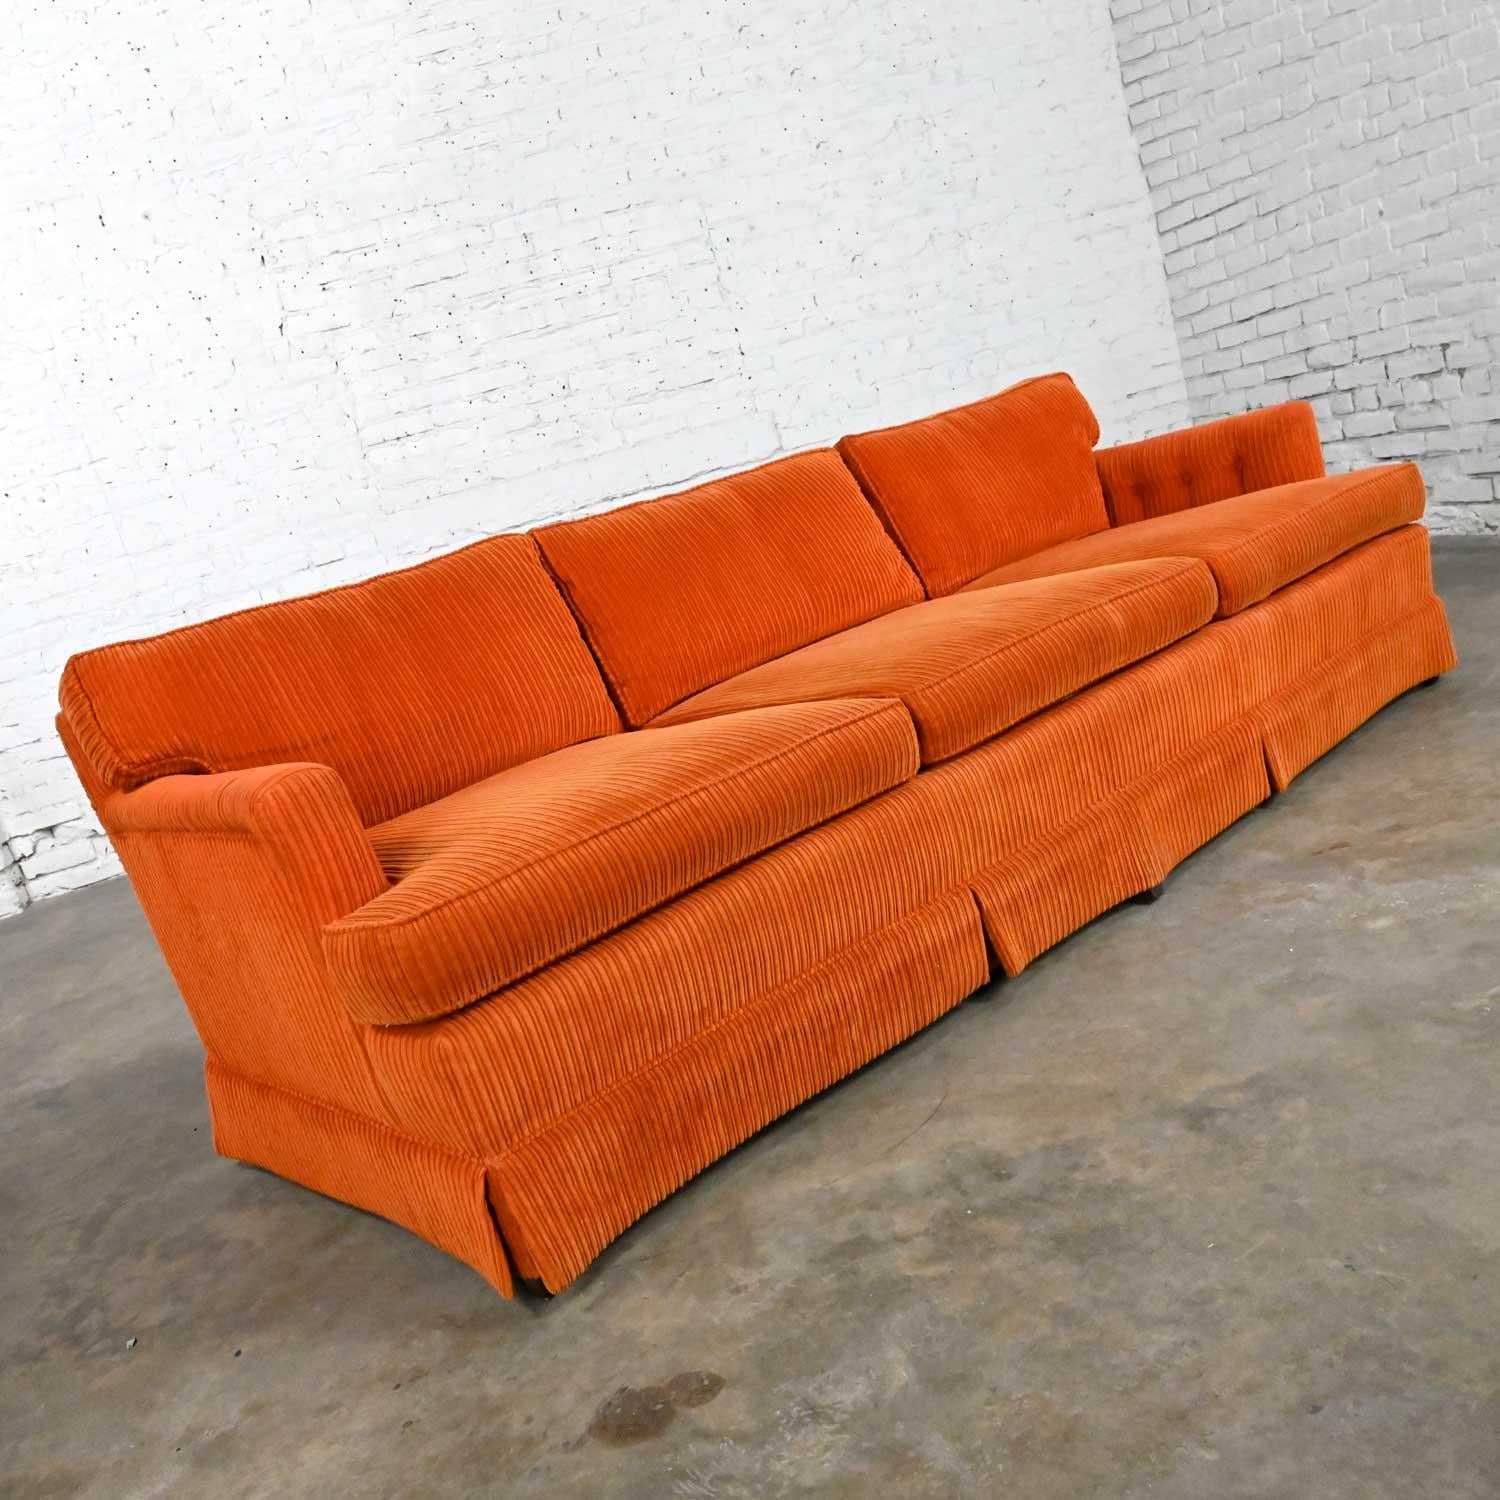 Awesome vintage MCM a.k.a. mid-century modern to modern Lawson style orange wide wale corduroy sofa by Drexel. Beautiful condition, keeping in mind that this is vintage and not new so will have signs of use and wear. We noticed some slight fading or